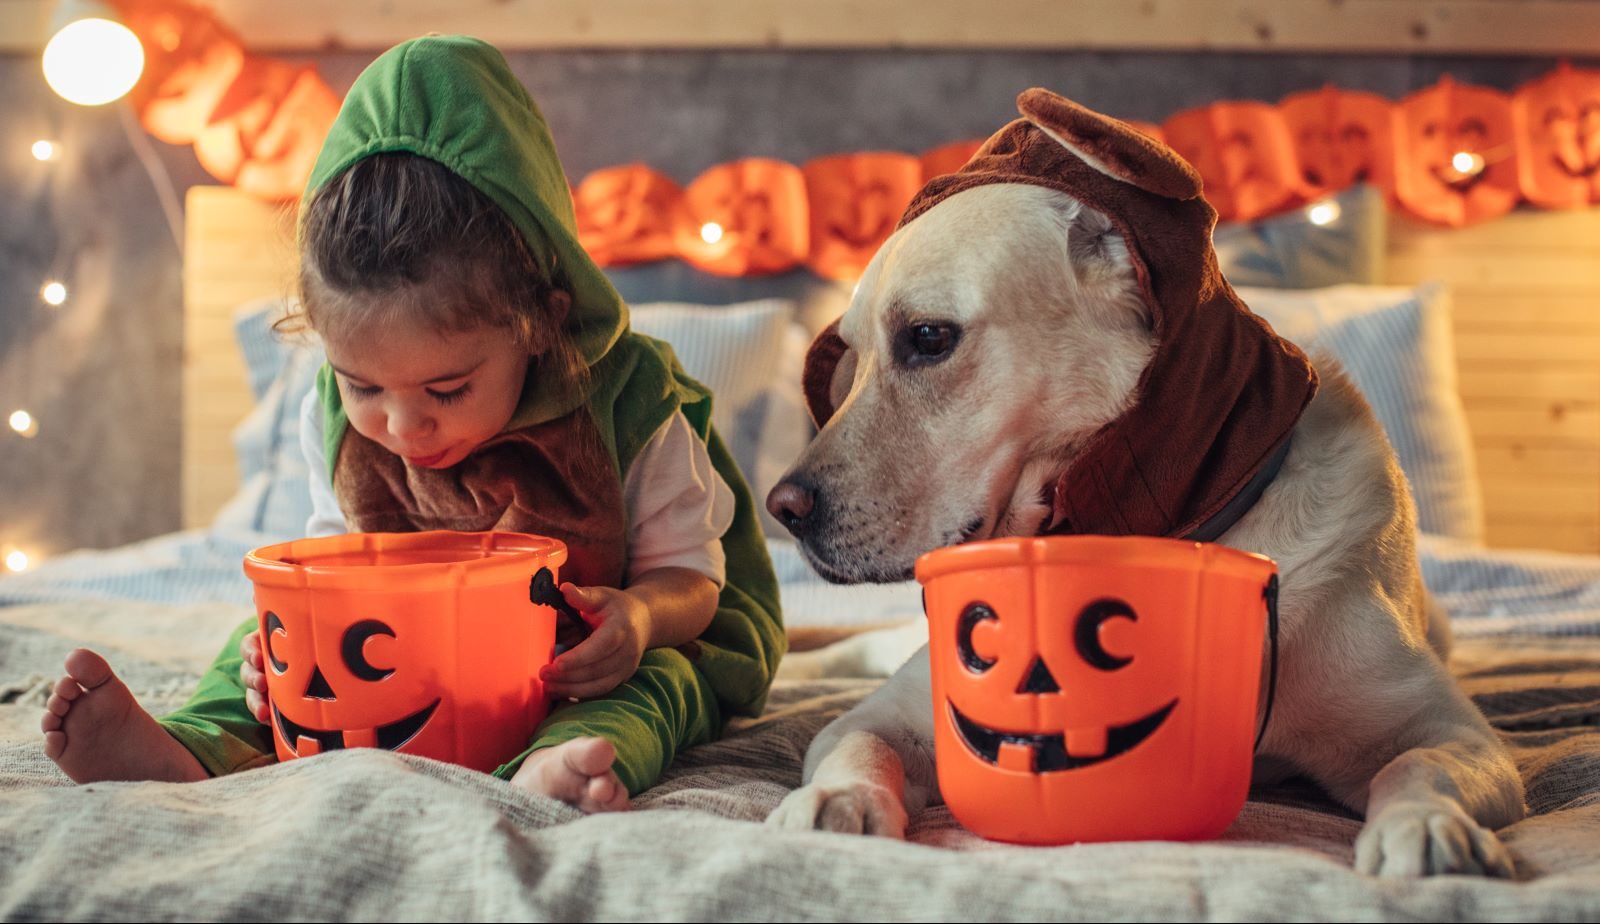 Melissa Keeney, a Hartford HealthCare dietician offers five tips to enjoy a healthy Halloween, and choose the healthiest Halloween candy.